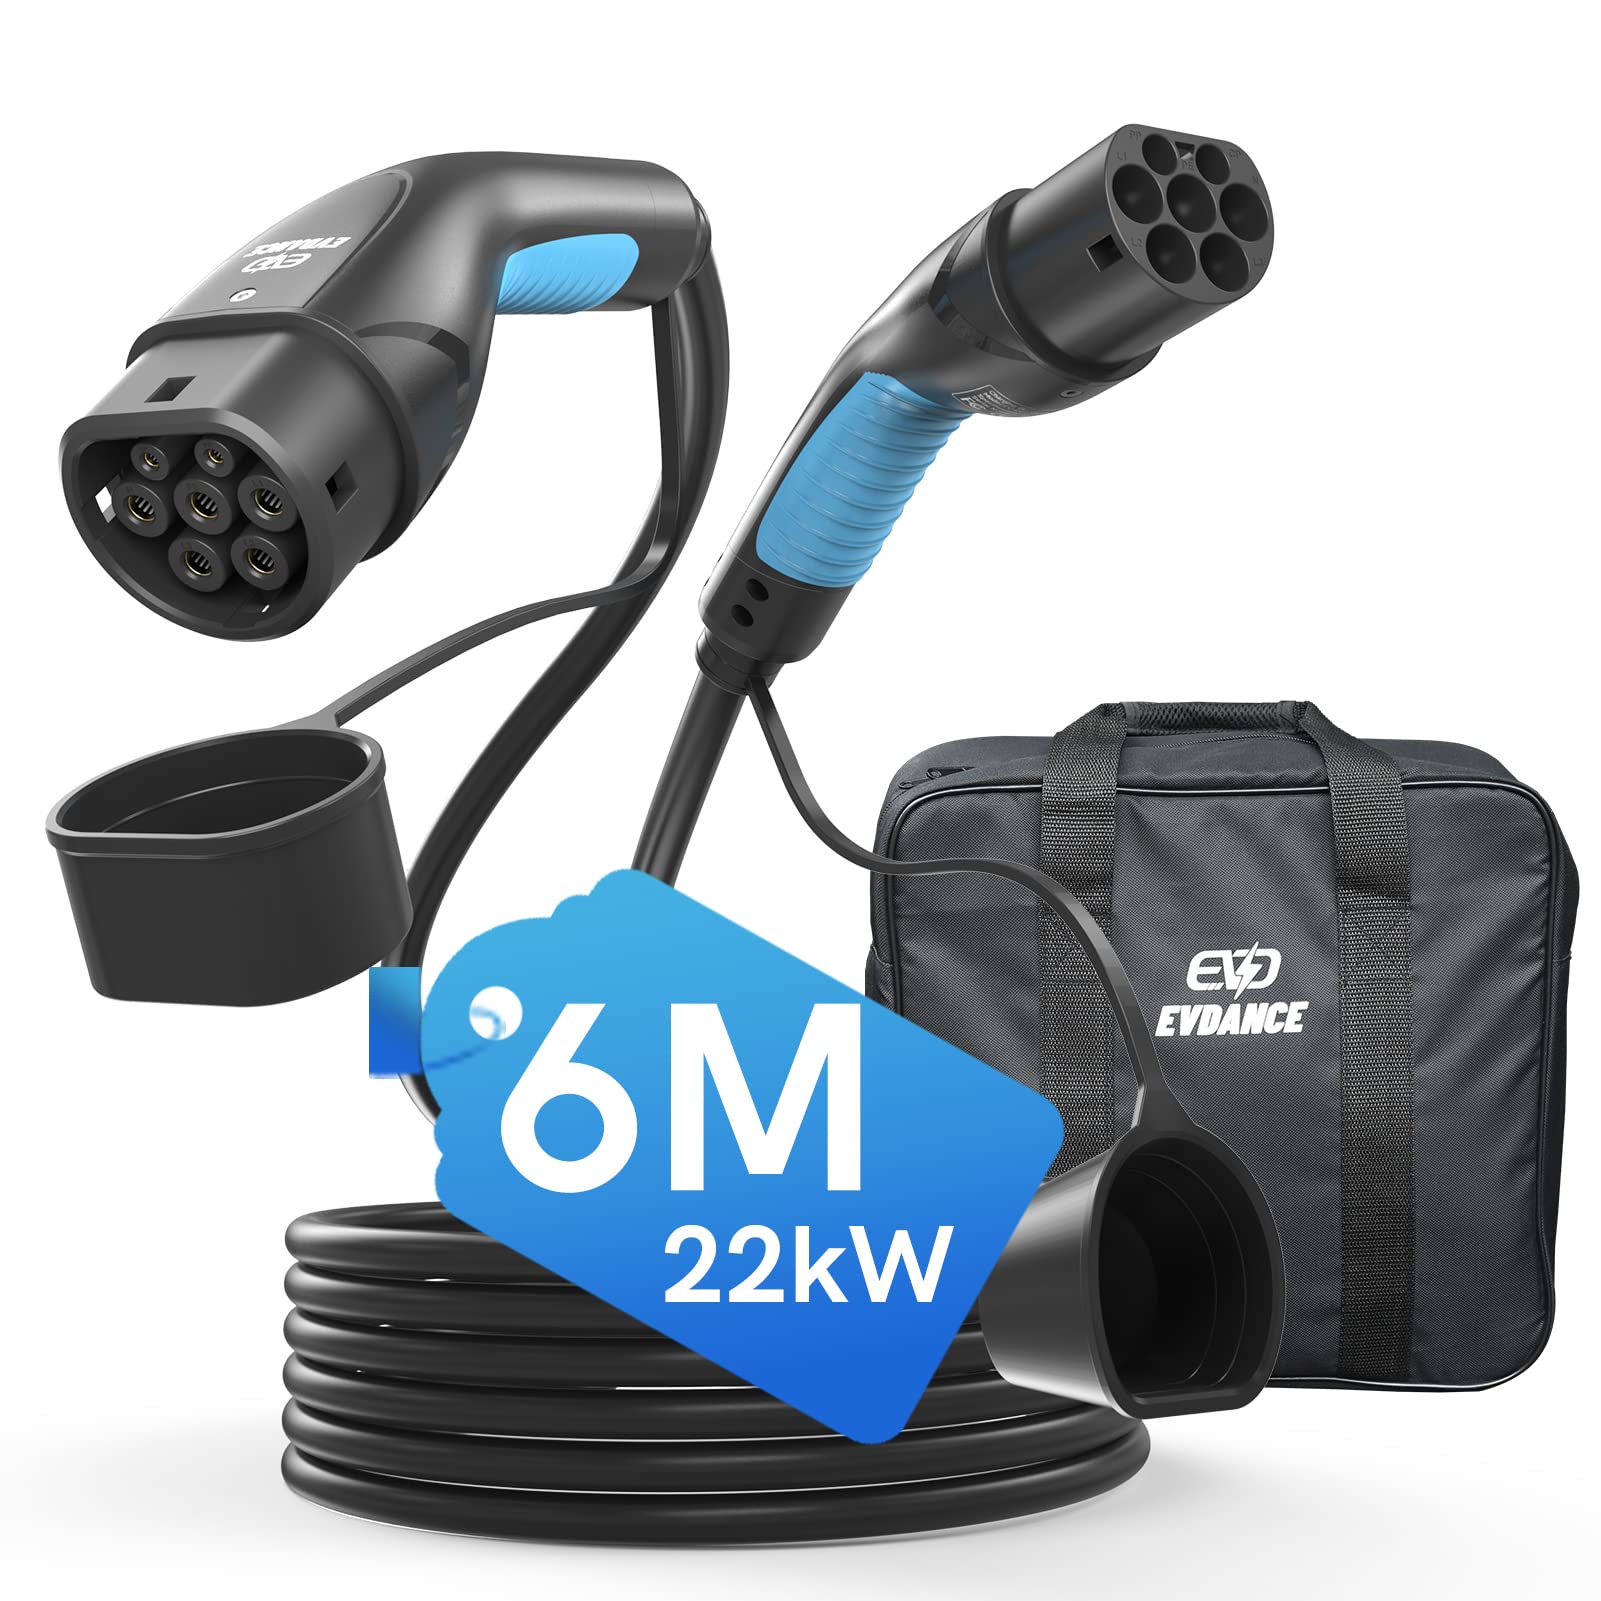 EVDANCE Type 2 to Type 2 Charging Cable for E Car EV/PHEV